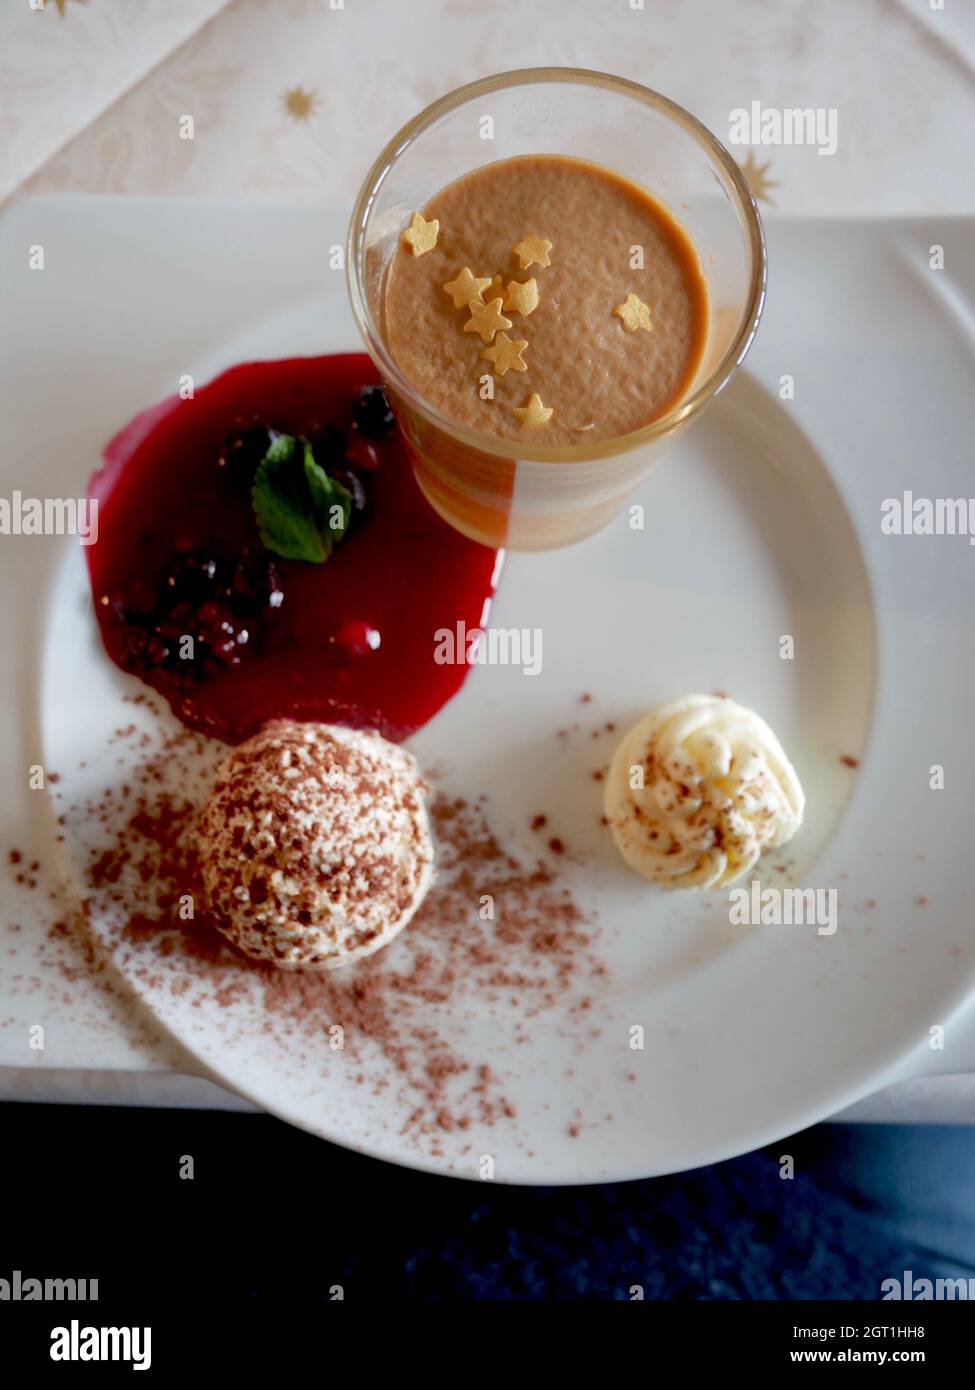 High Angle View Of Dessert Served On Table Stock Photo